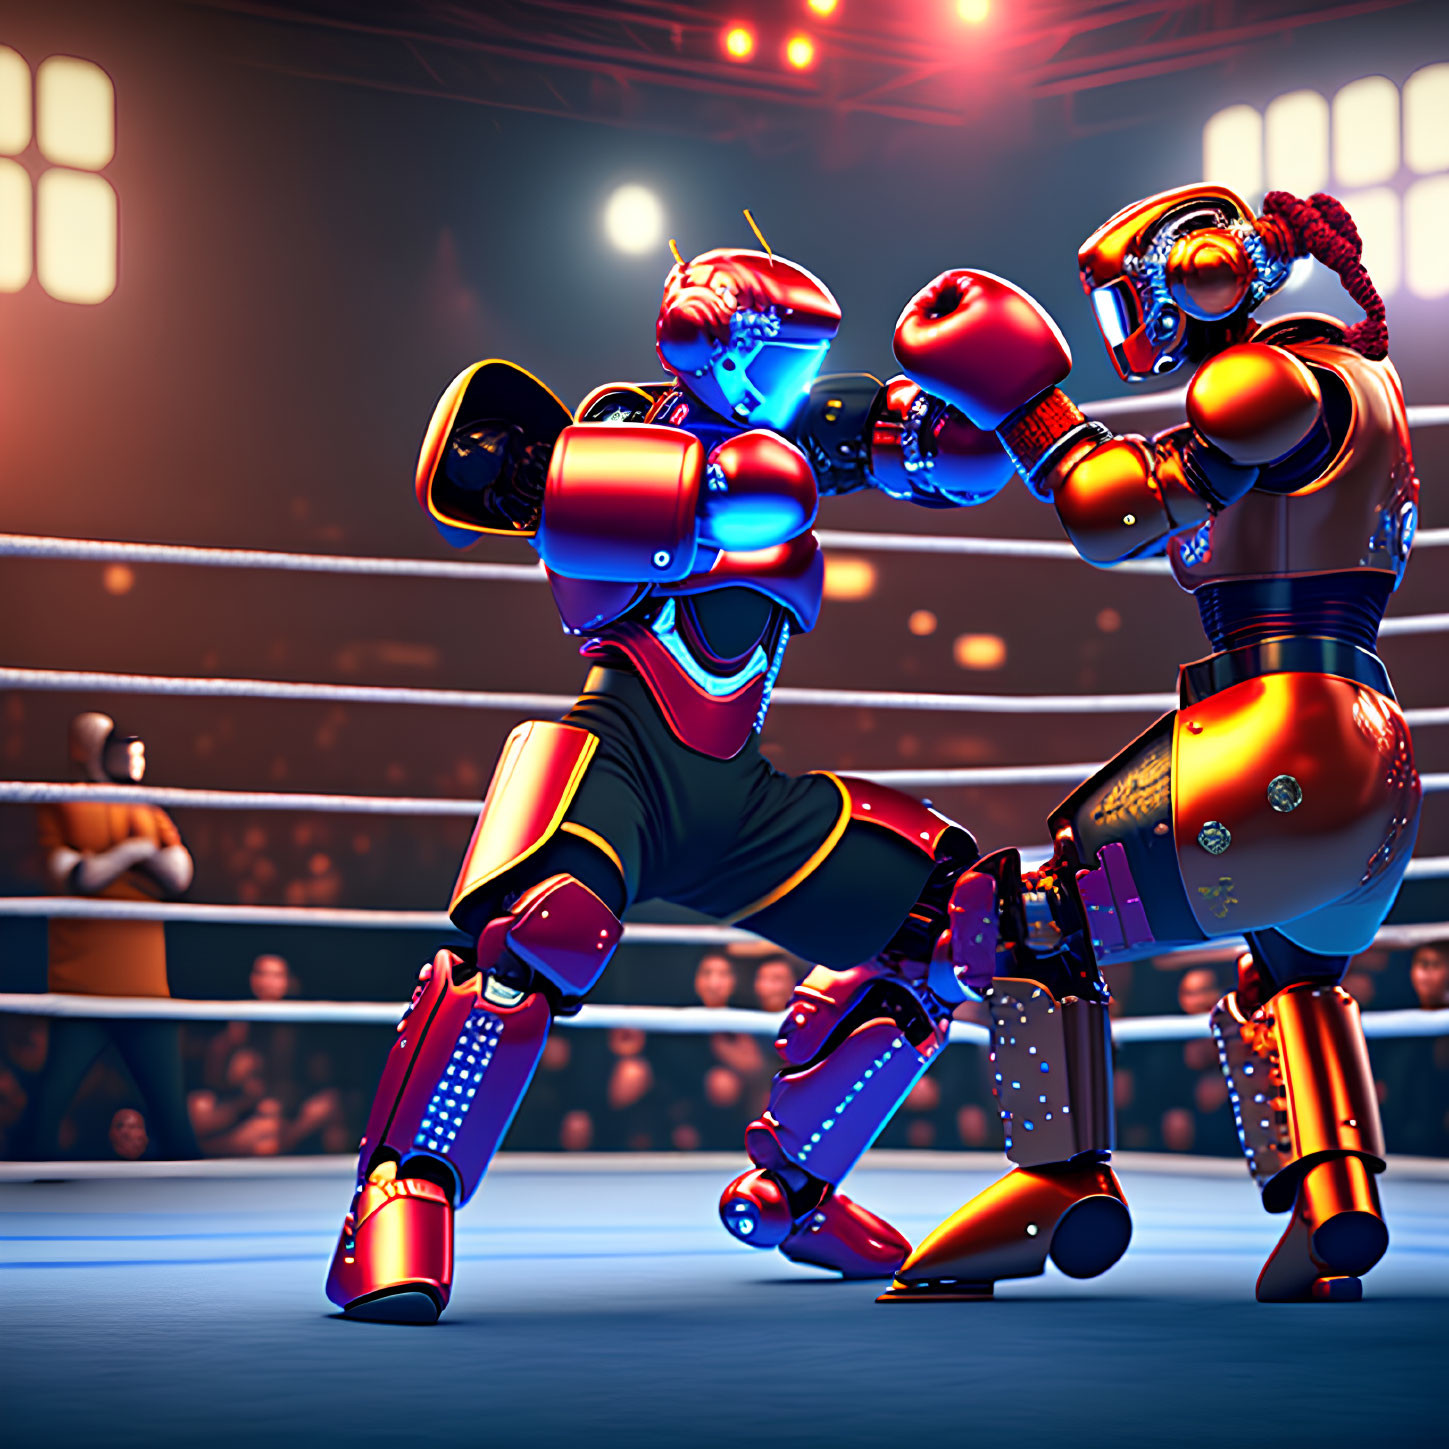 Robots boxing in arena with spectators and dramatic lighting